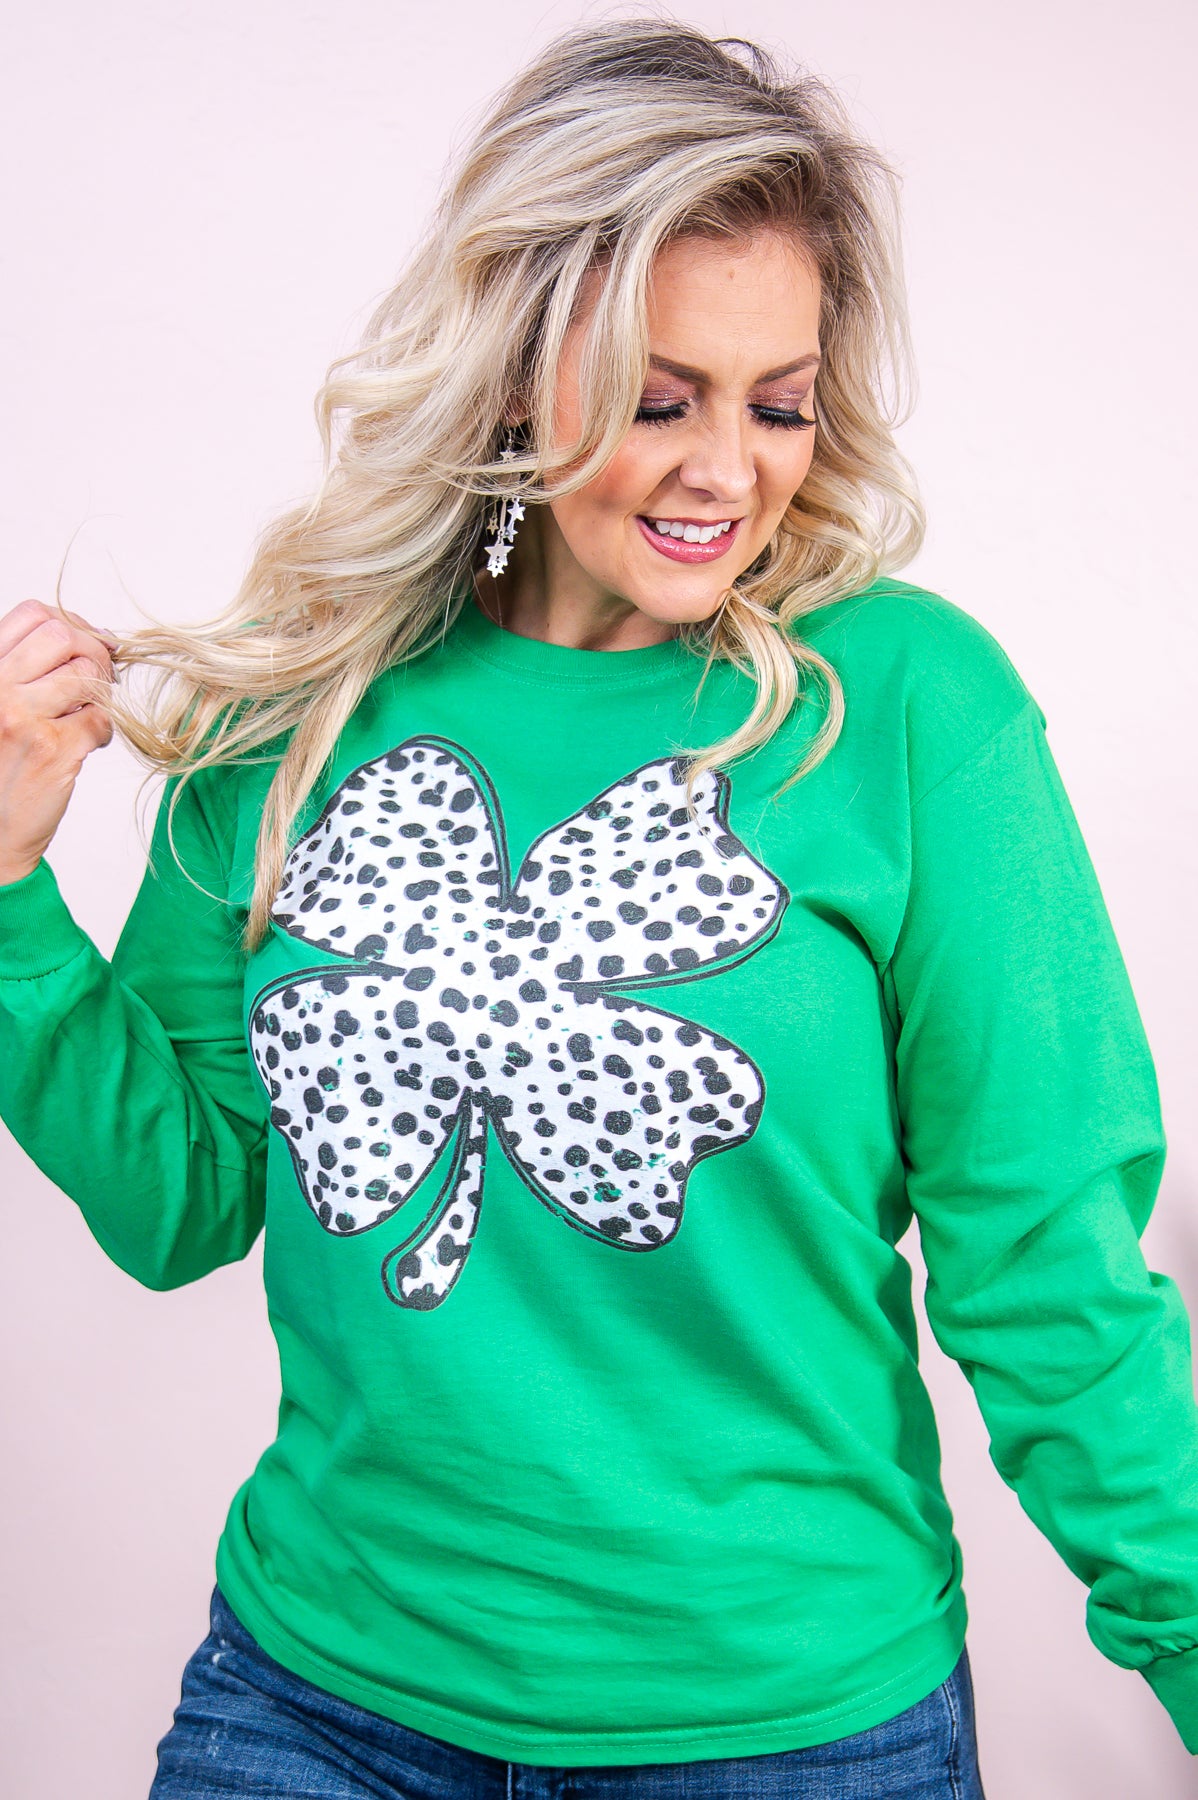 Wishin' You A Pot O' Gold Printed Clover Long Sleeve Graphic Tee - A3190IGN